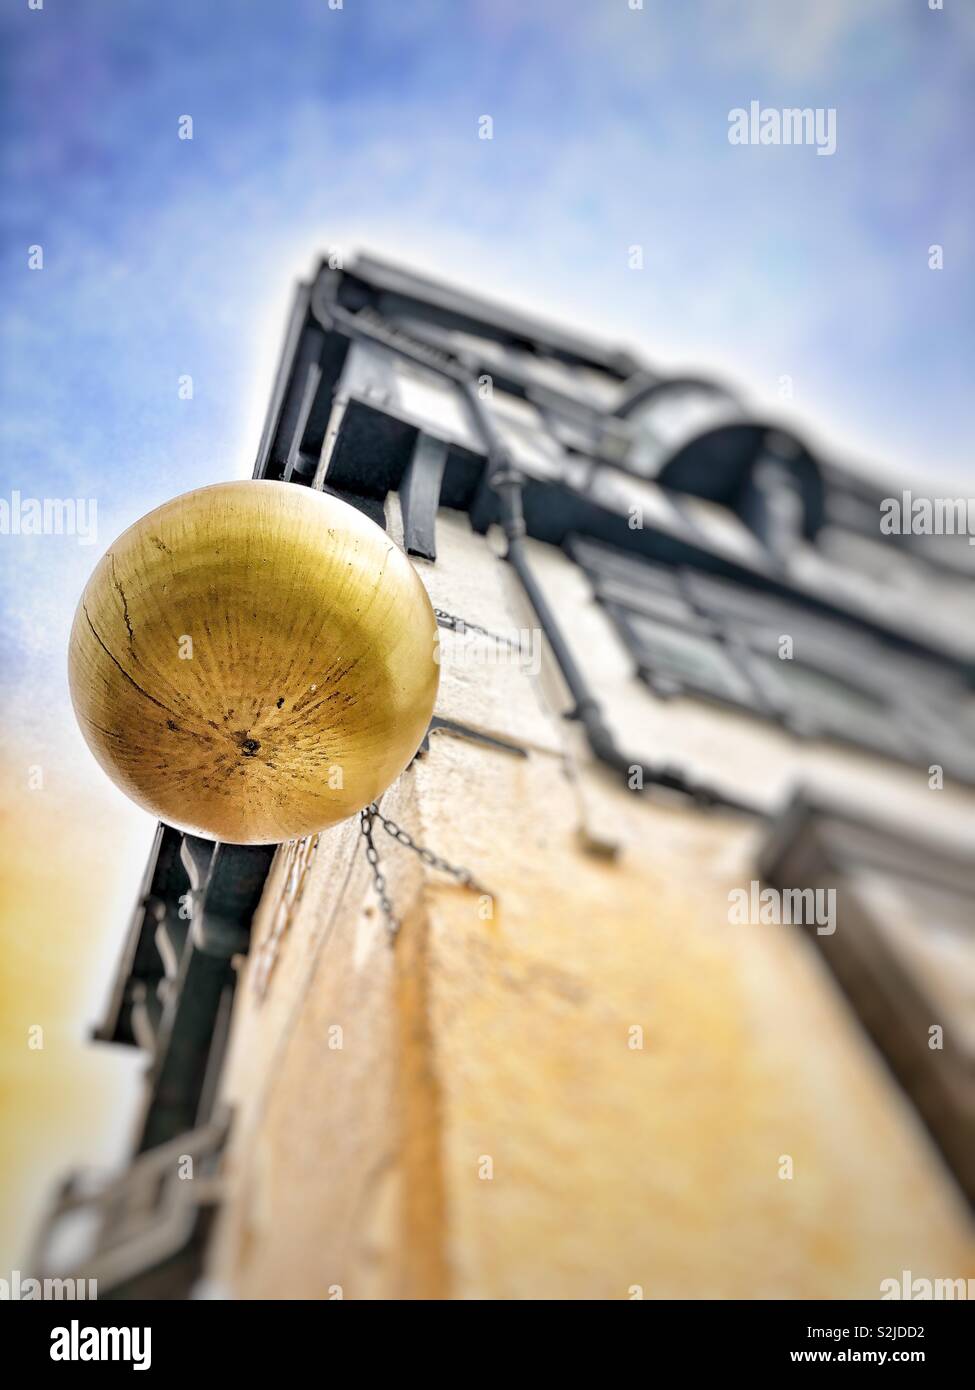 Focus on a golden ball advertising feature hanging outside a pub in Scarborough, UK. Viewed from below. Lens blur. Stock Photo